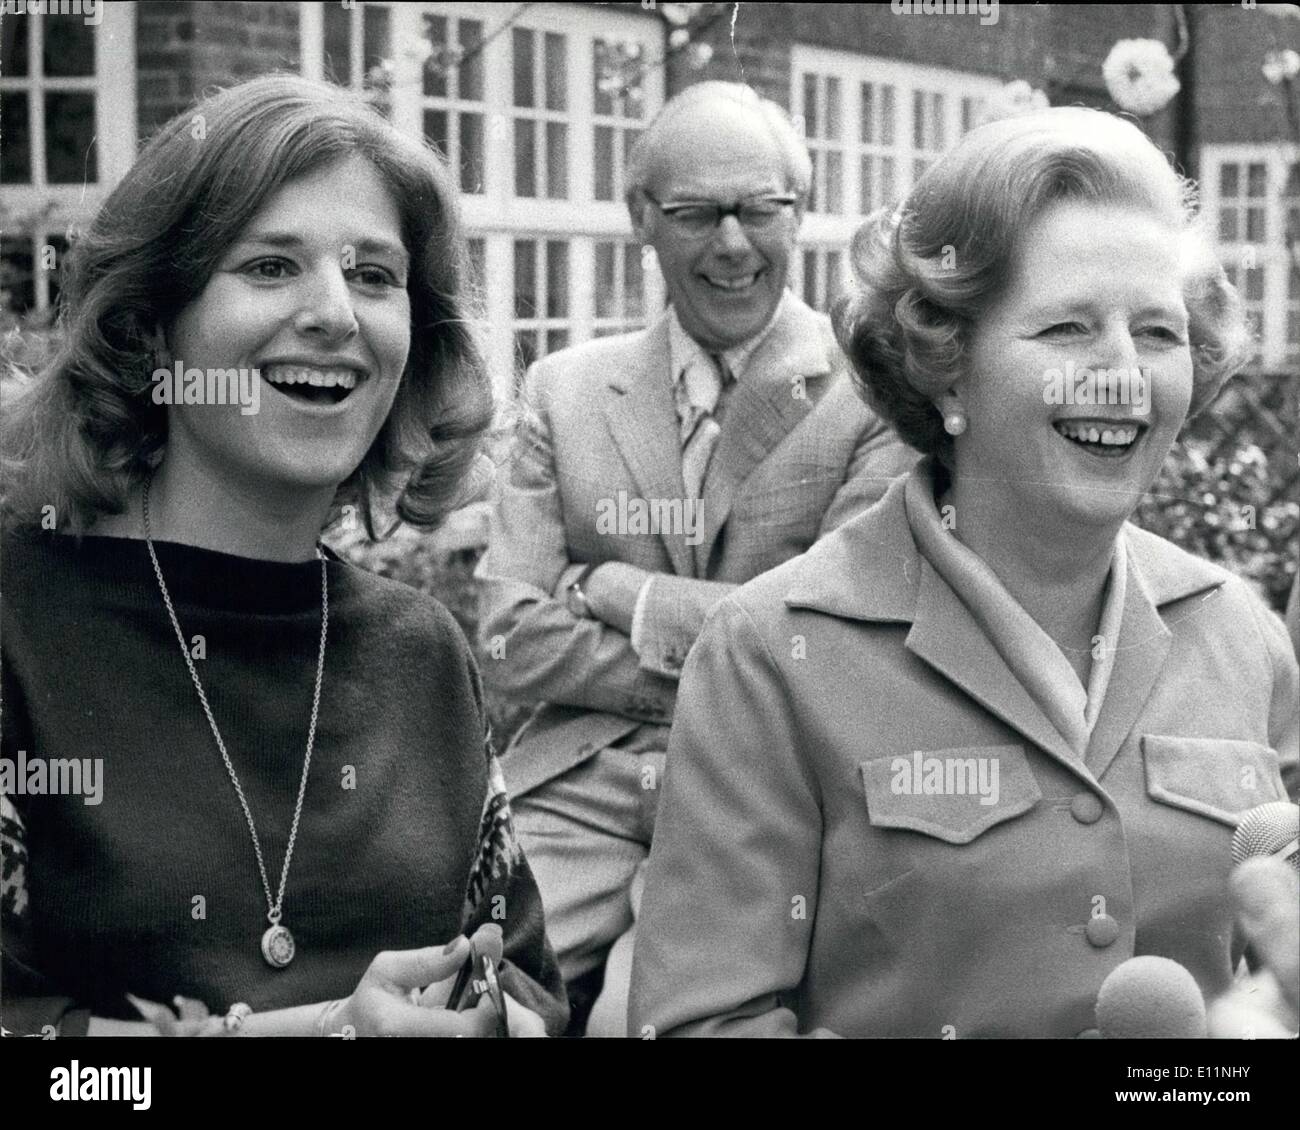 Apr. 04, 1979 - Mrs. Thatcher's daughter Carol back from Australia to help her mother: The Conservative leader Mrs. Thatcher outside her home with her husband Donie and their 23 year old Daughter Carol, a reporter on the Sydney Herald who has come back from Australia to lend a hand in her mother's Election Campaign. Stock Photo